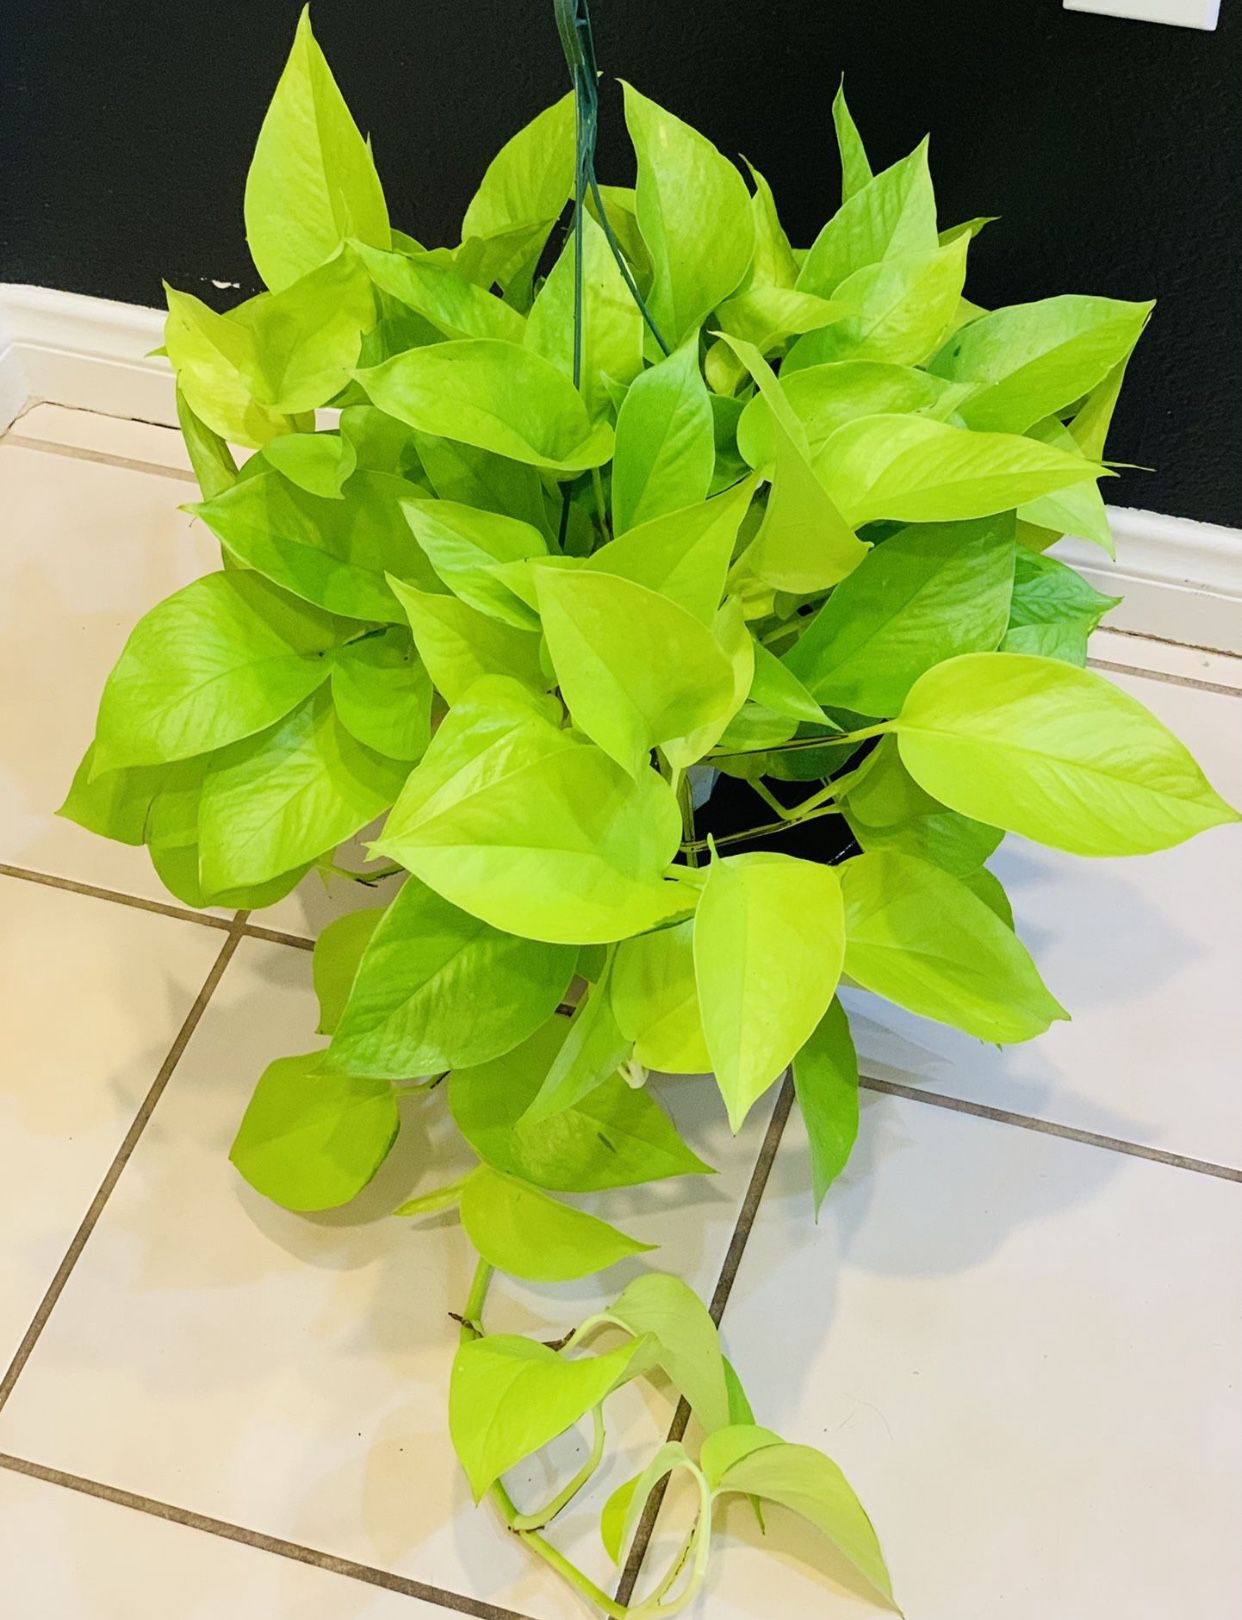 Pretty Bigg Gorgeous ♥️ neon pothos BACK IN STOCK in 6” Pot $30 EACH💚ONLY 4 Left♥️